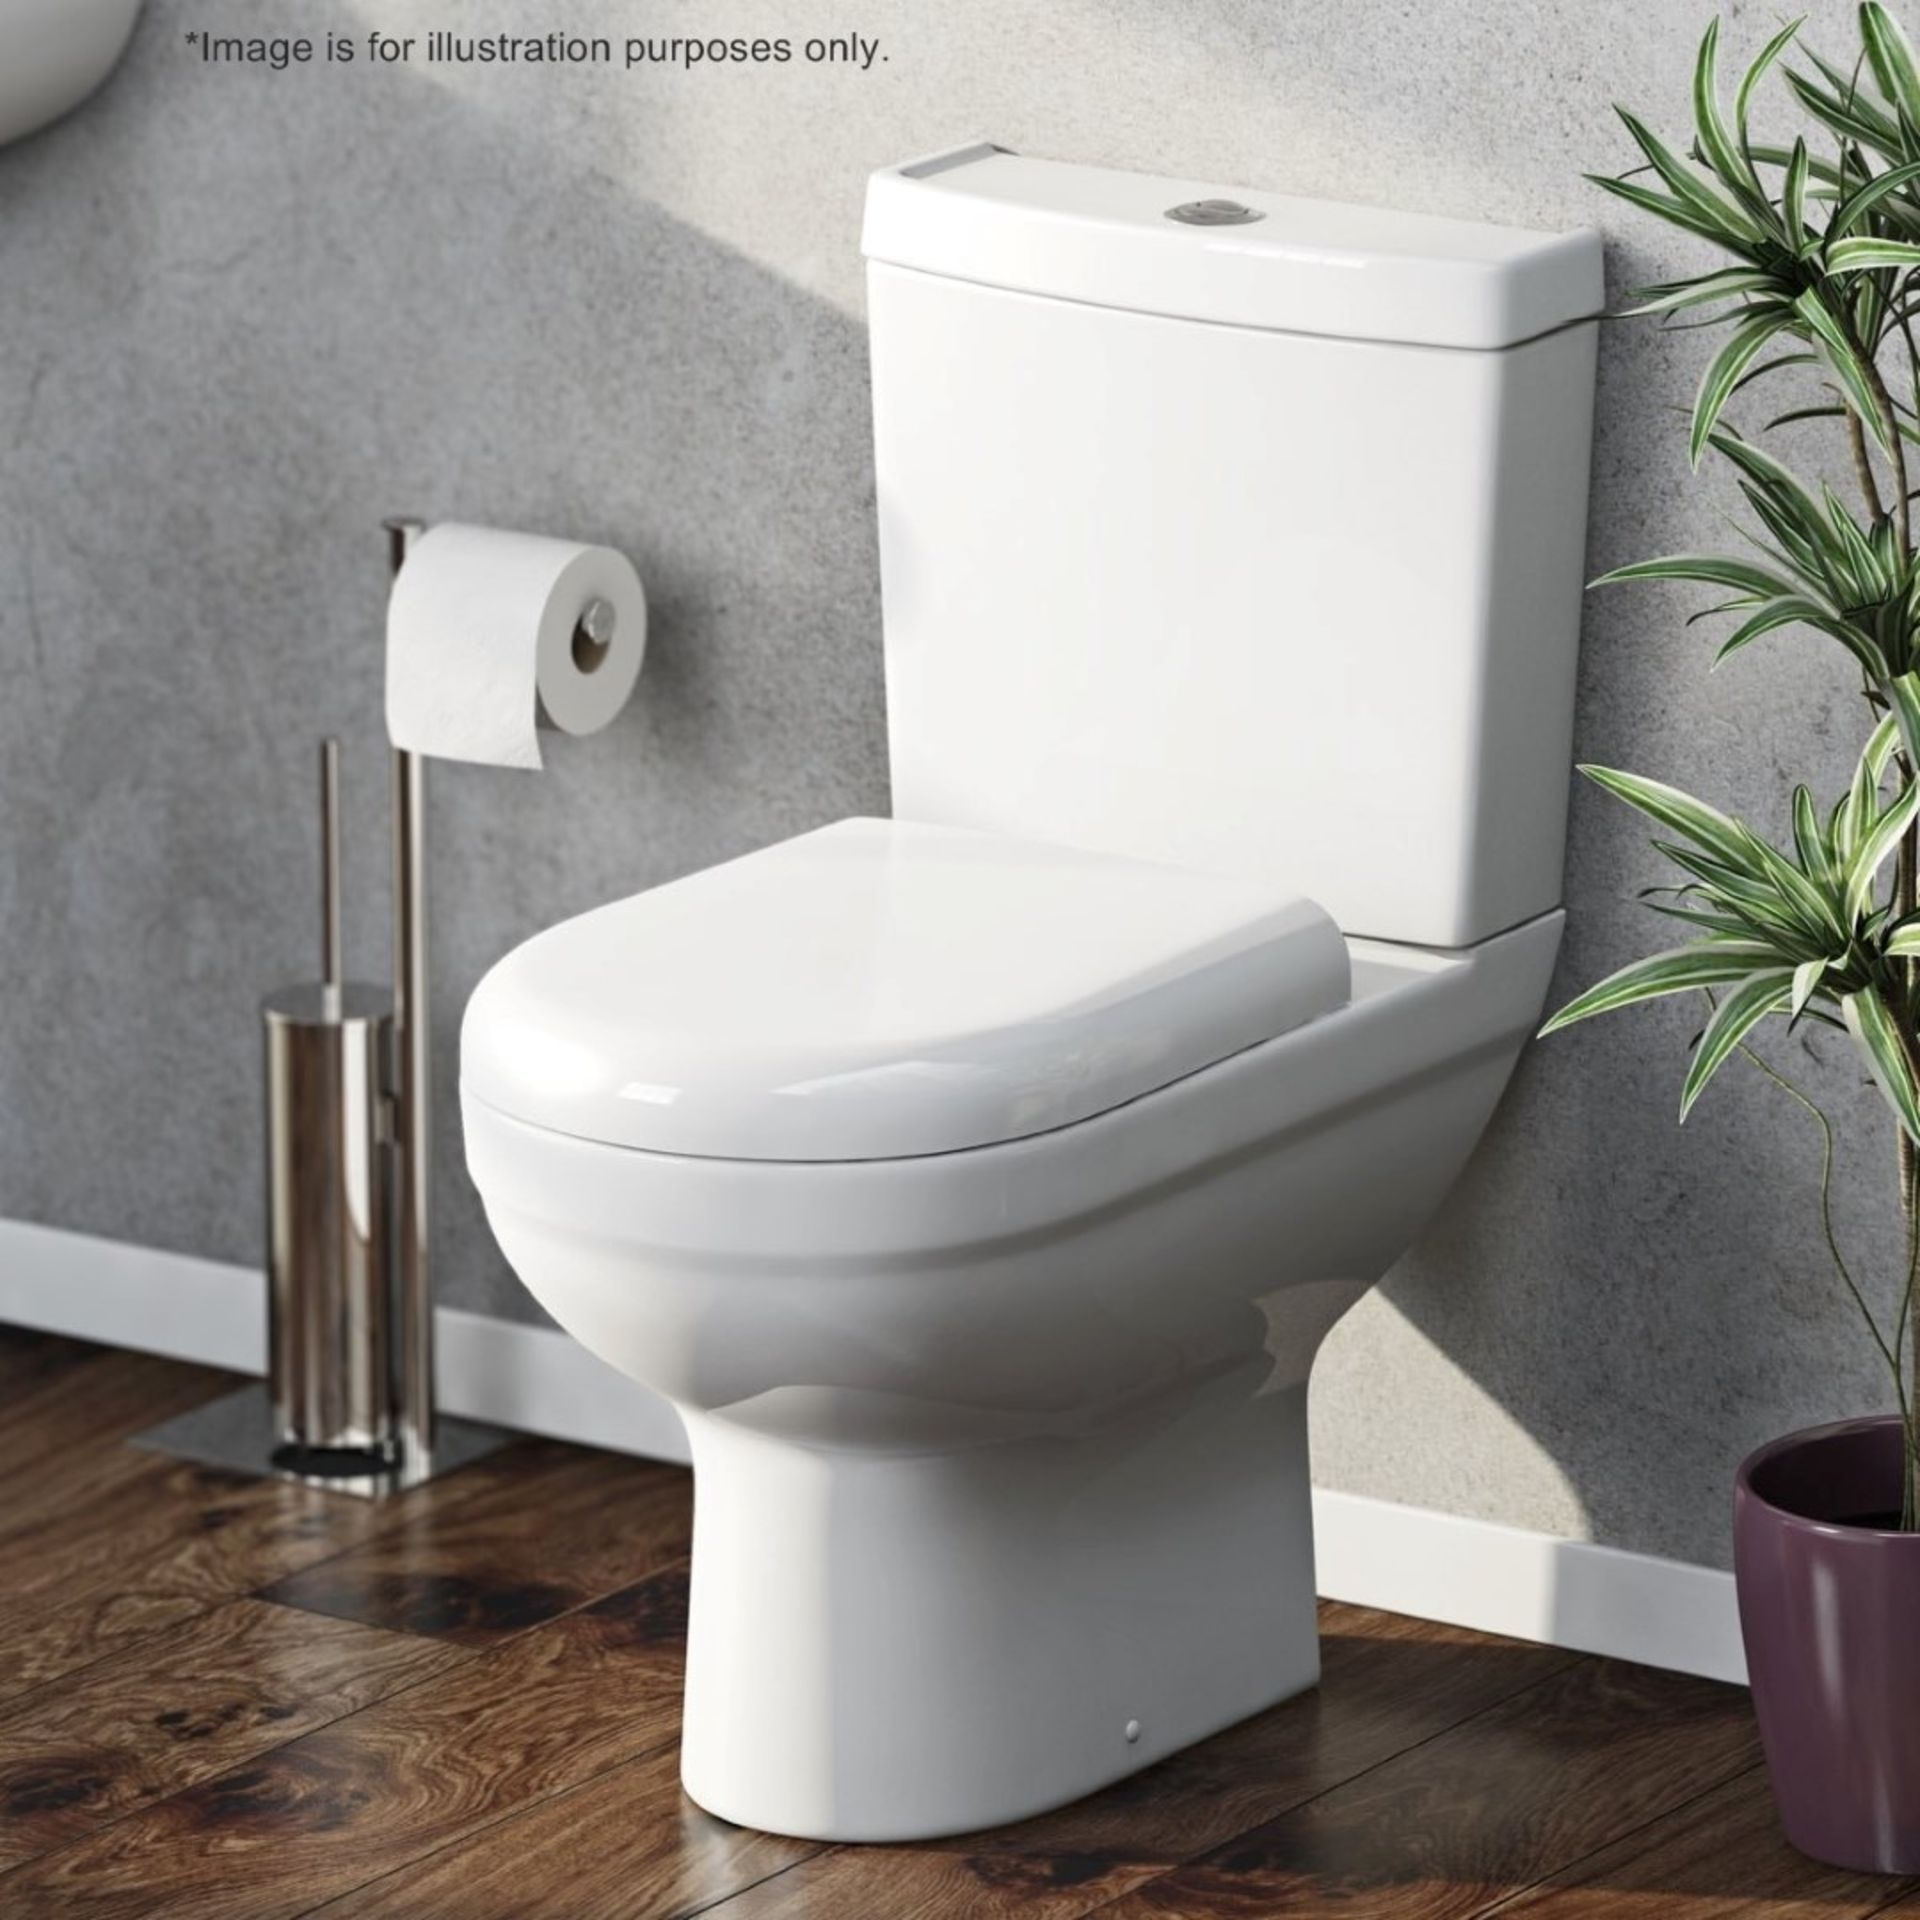 1 x COMO Close Coupled Toilet With Cistern + Soft Close Toilet Seat - Ref: GMJ016A - Unused